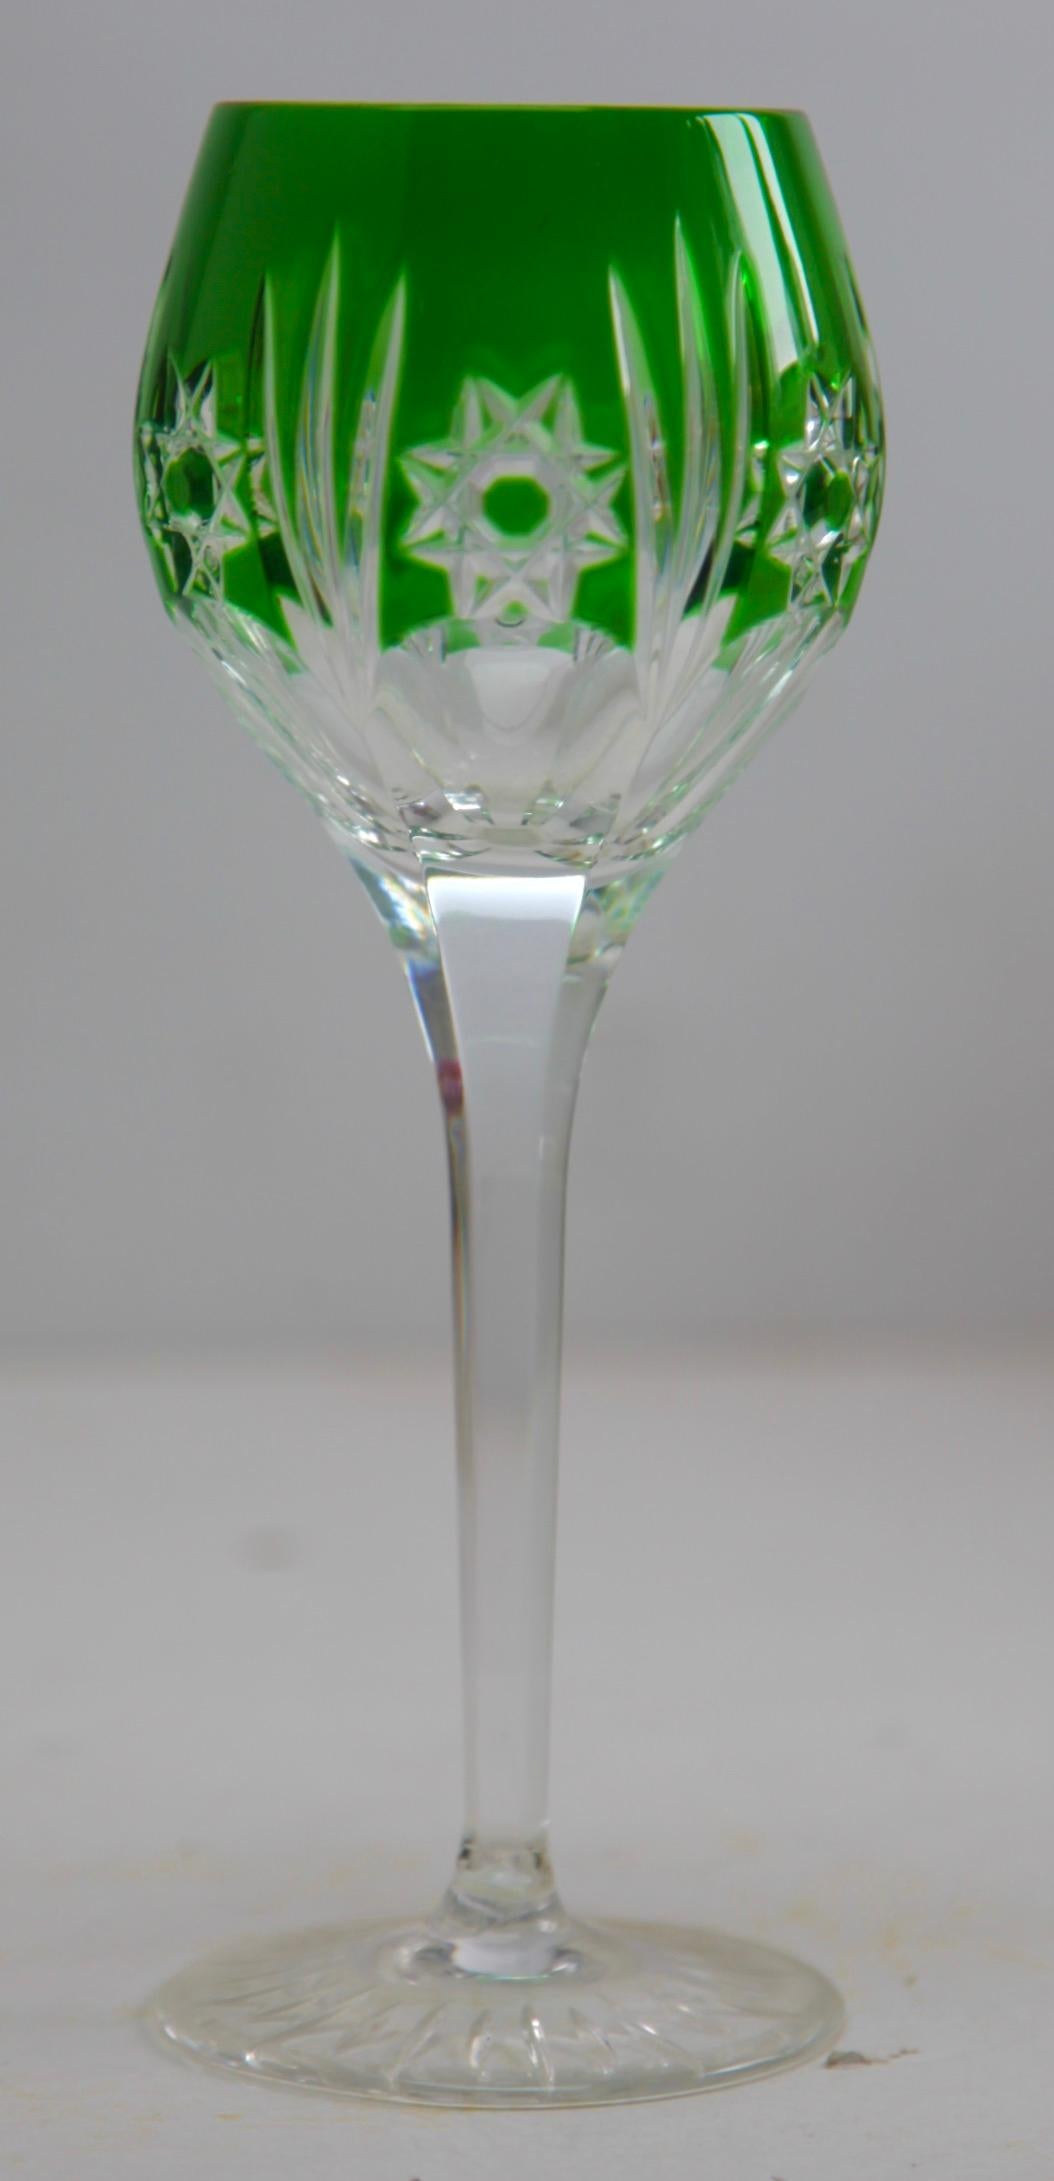 Faceted Crystal Mix Set of 12 Stem Glasses + 6 Water Goblets Colored Cut to Clear